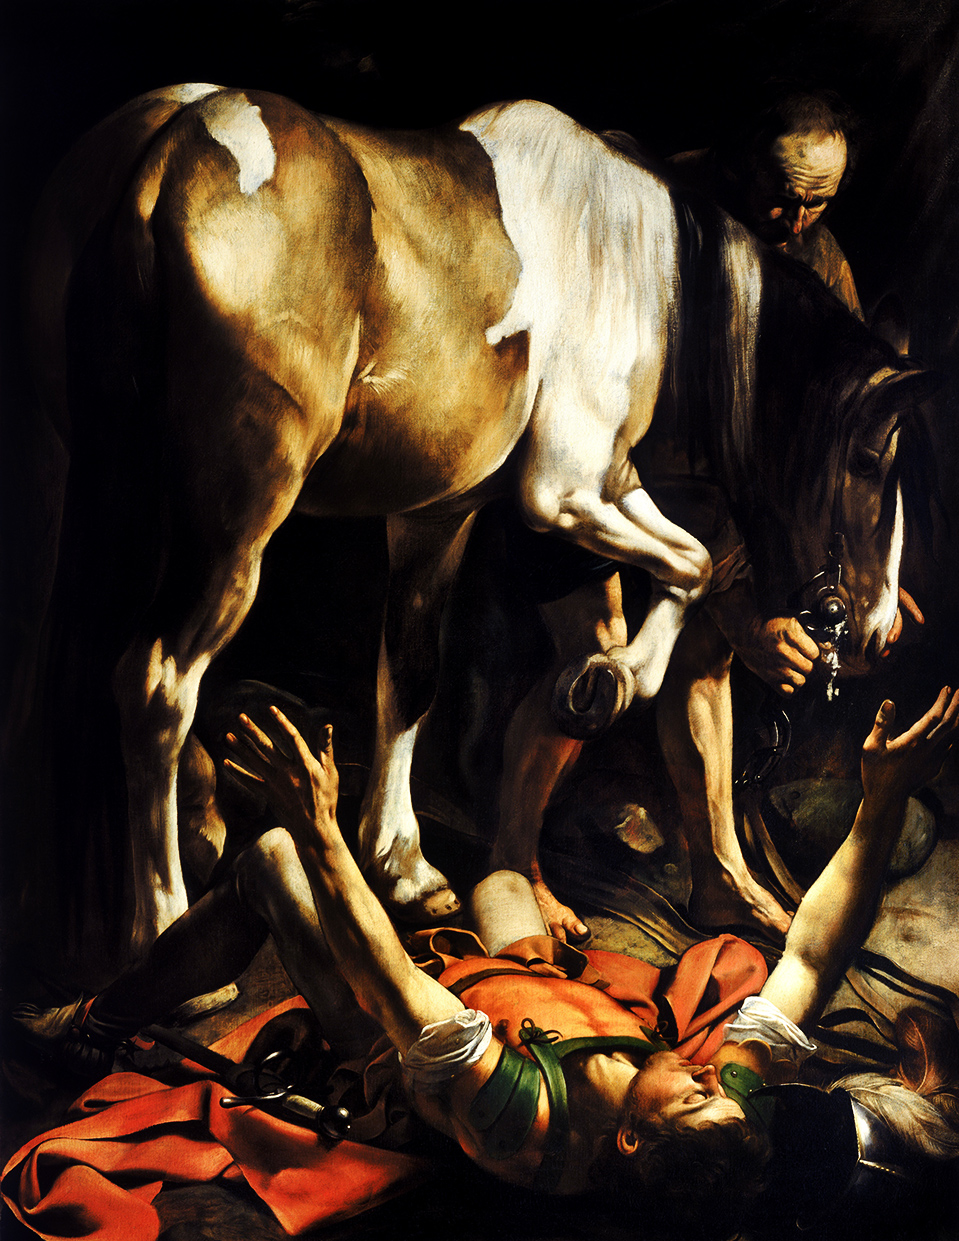 Caravaggio - Conversion on the Way to Damascus